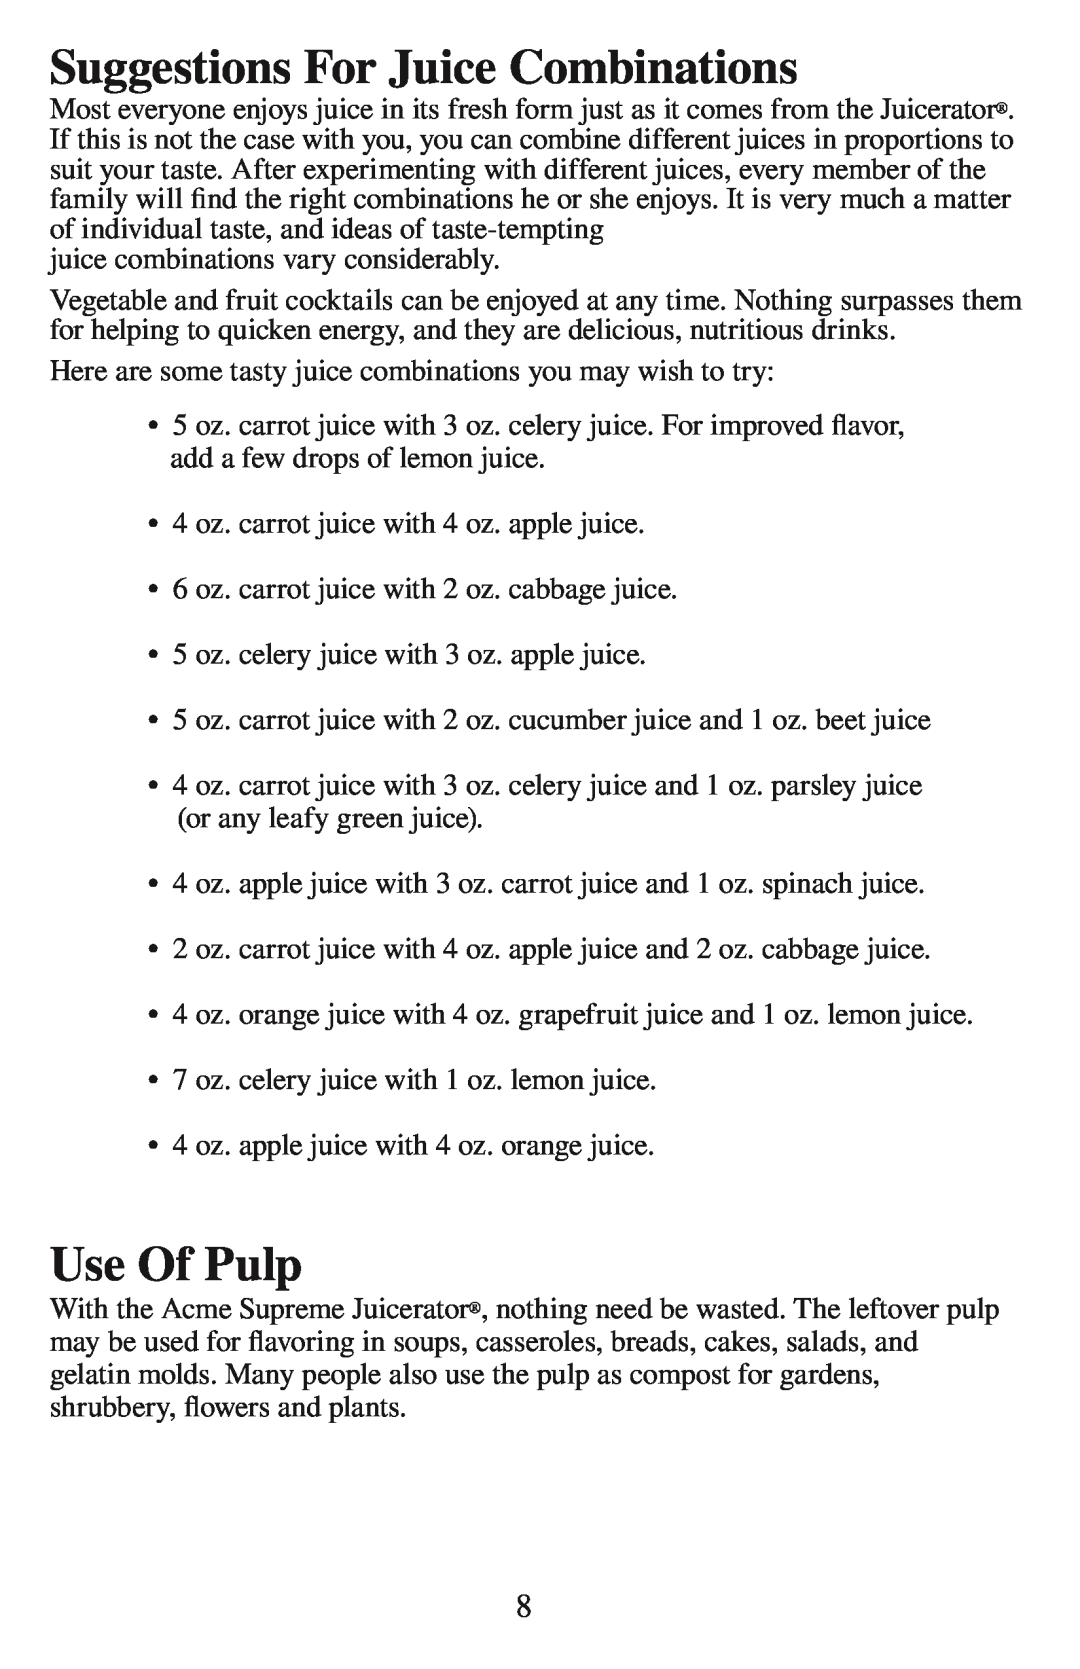 Acme Kitchenettes 6001 manual Suggestions For Juice Combinations, Use Of Pulp 